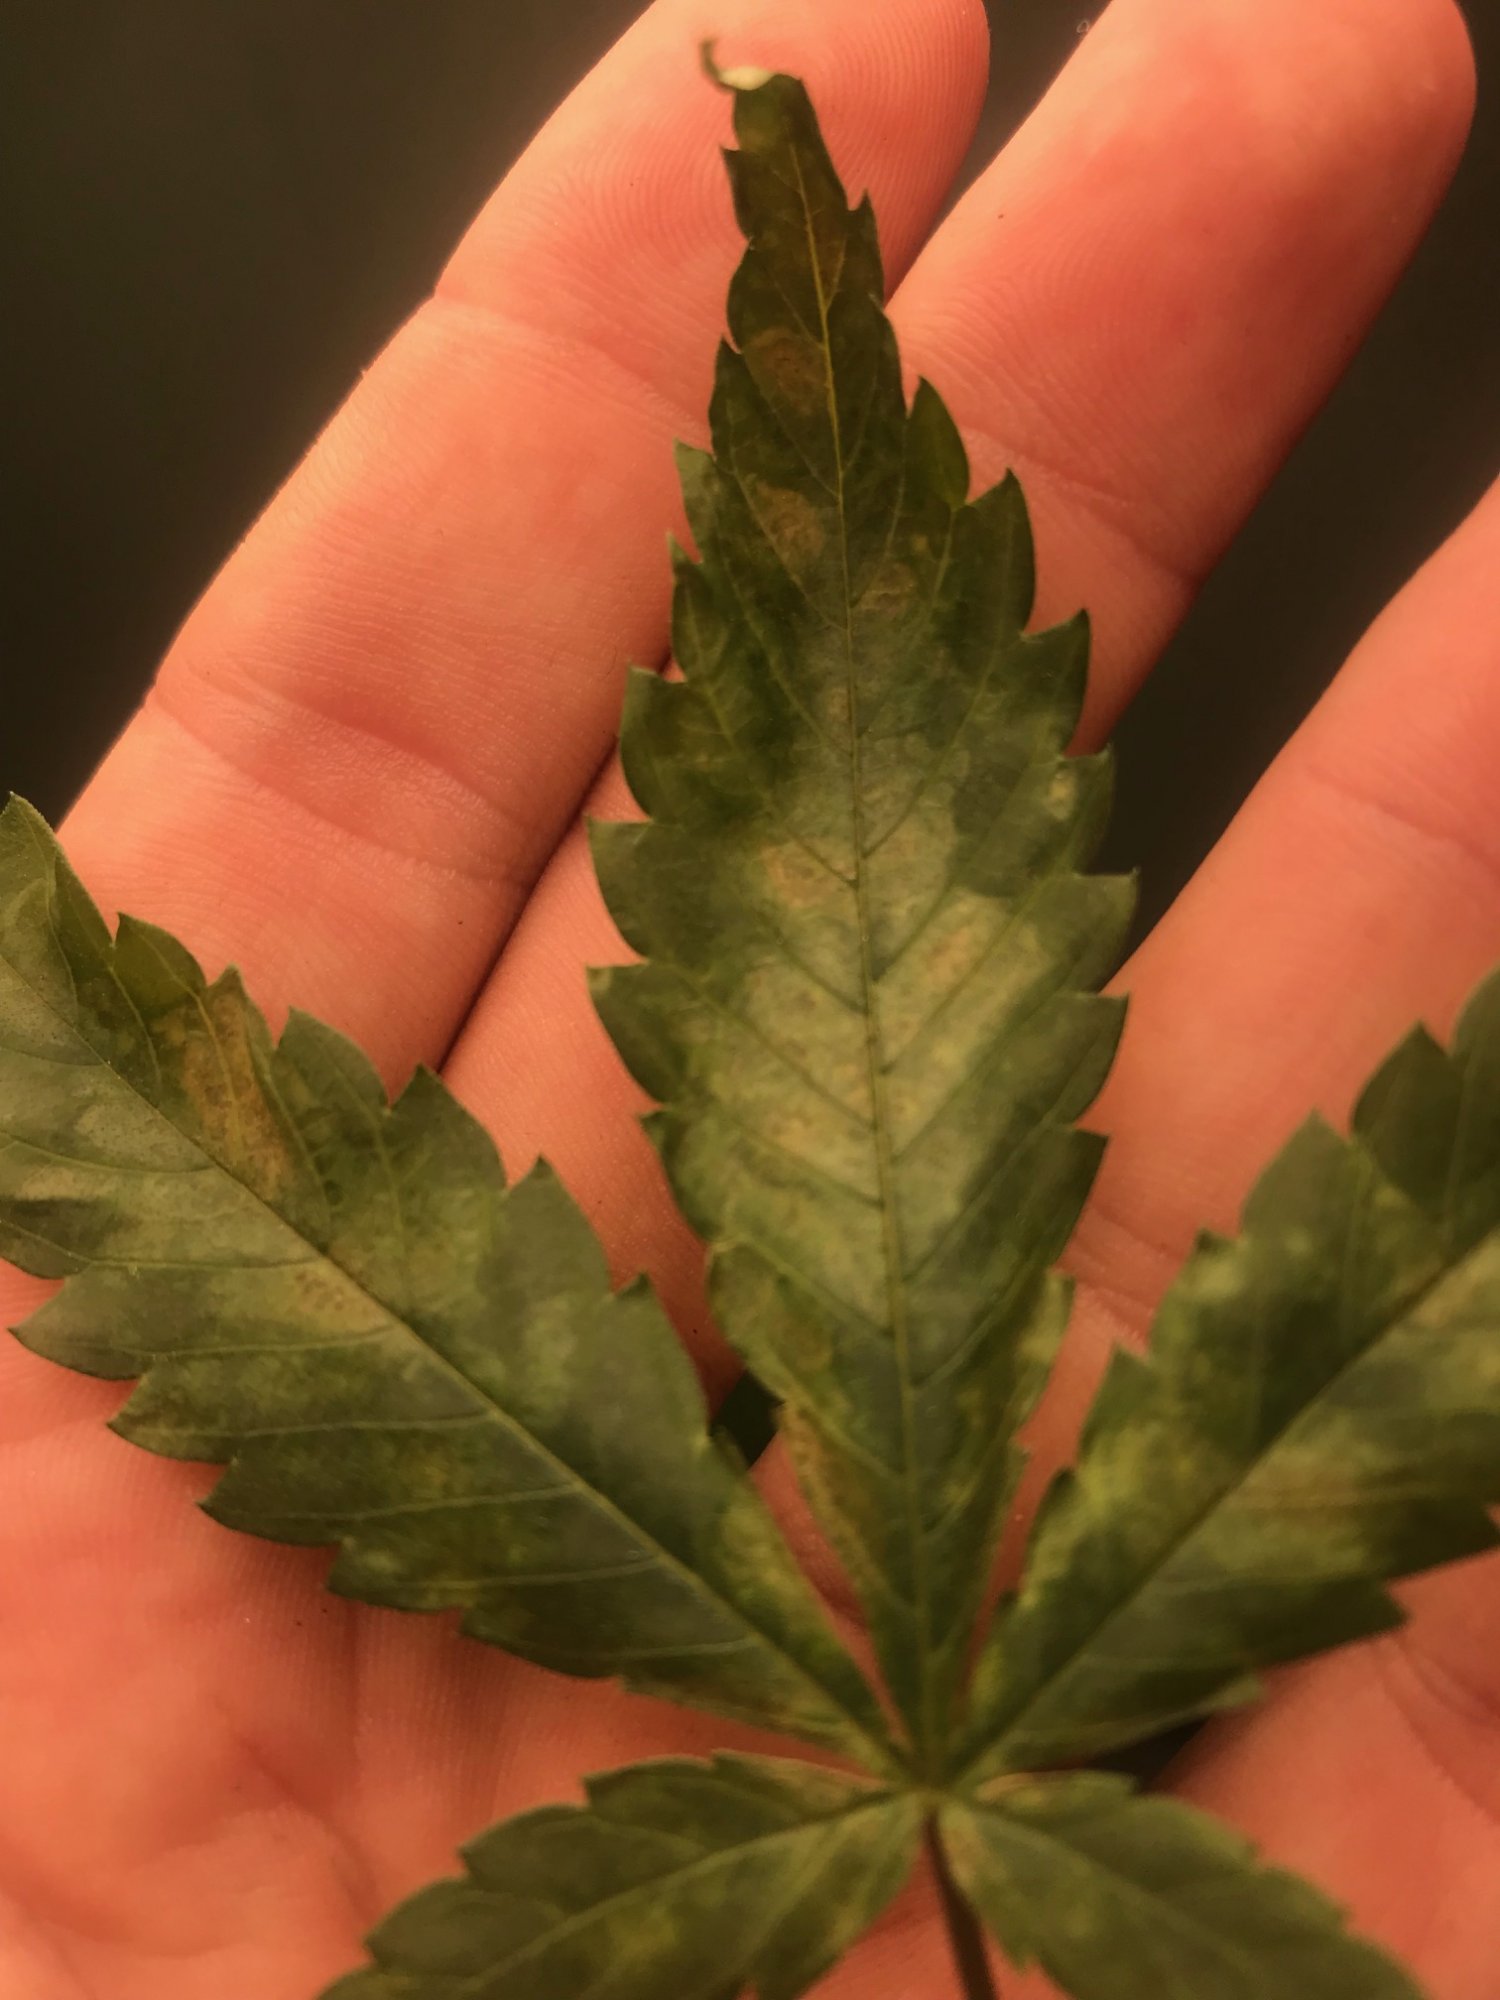 Orangey brownish spots on some leaves